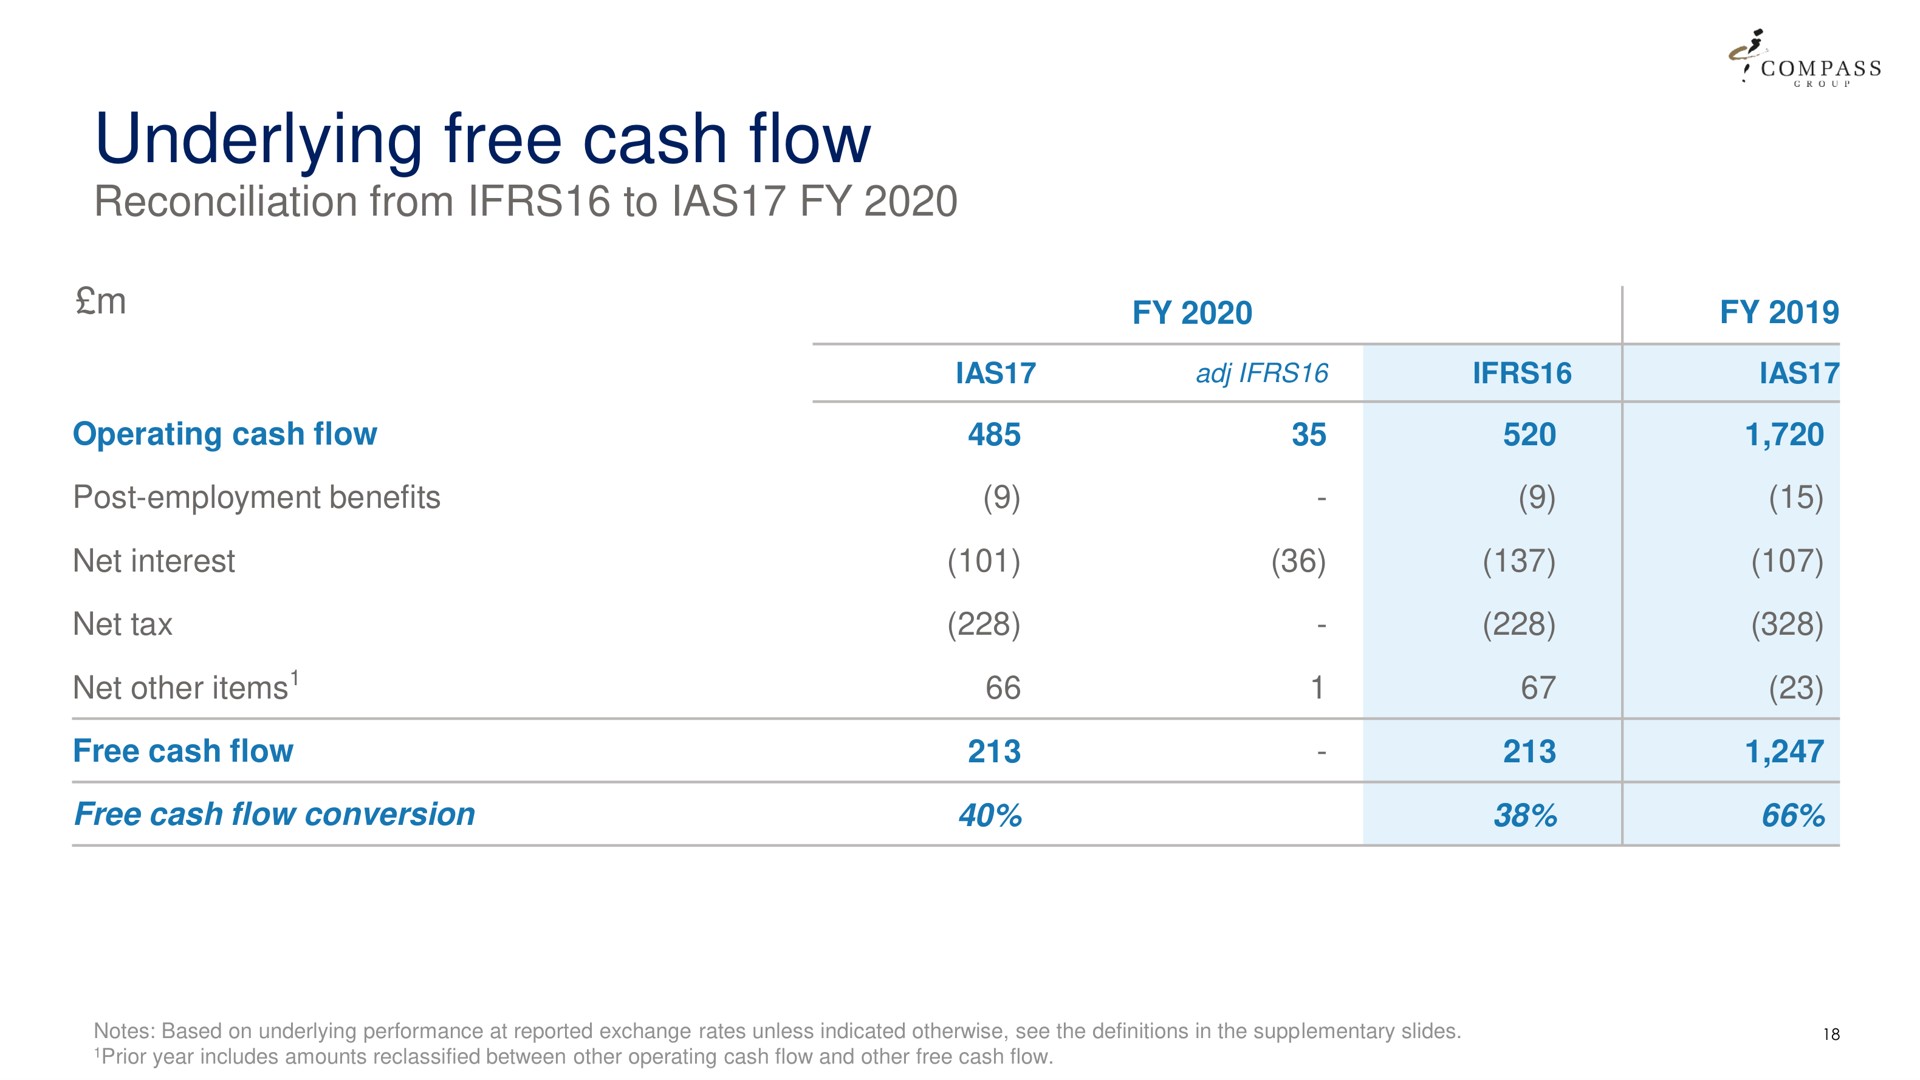 underlying free cash flow | Compass Group